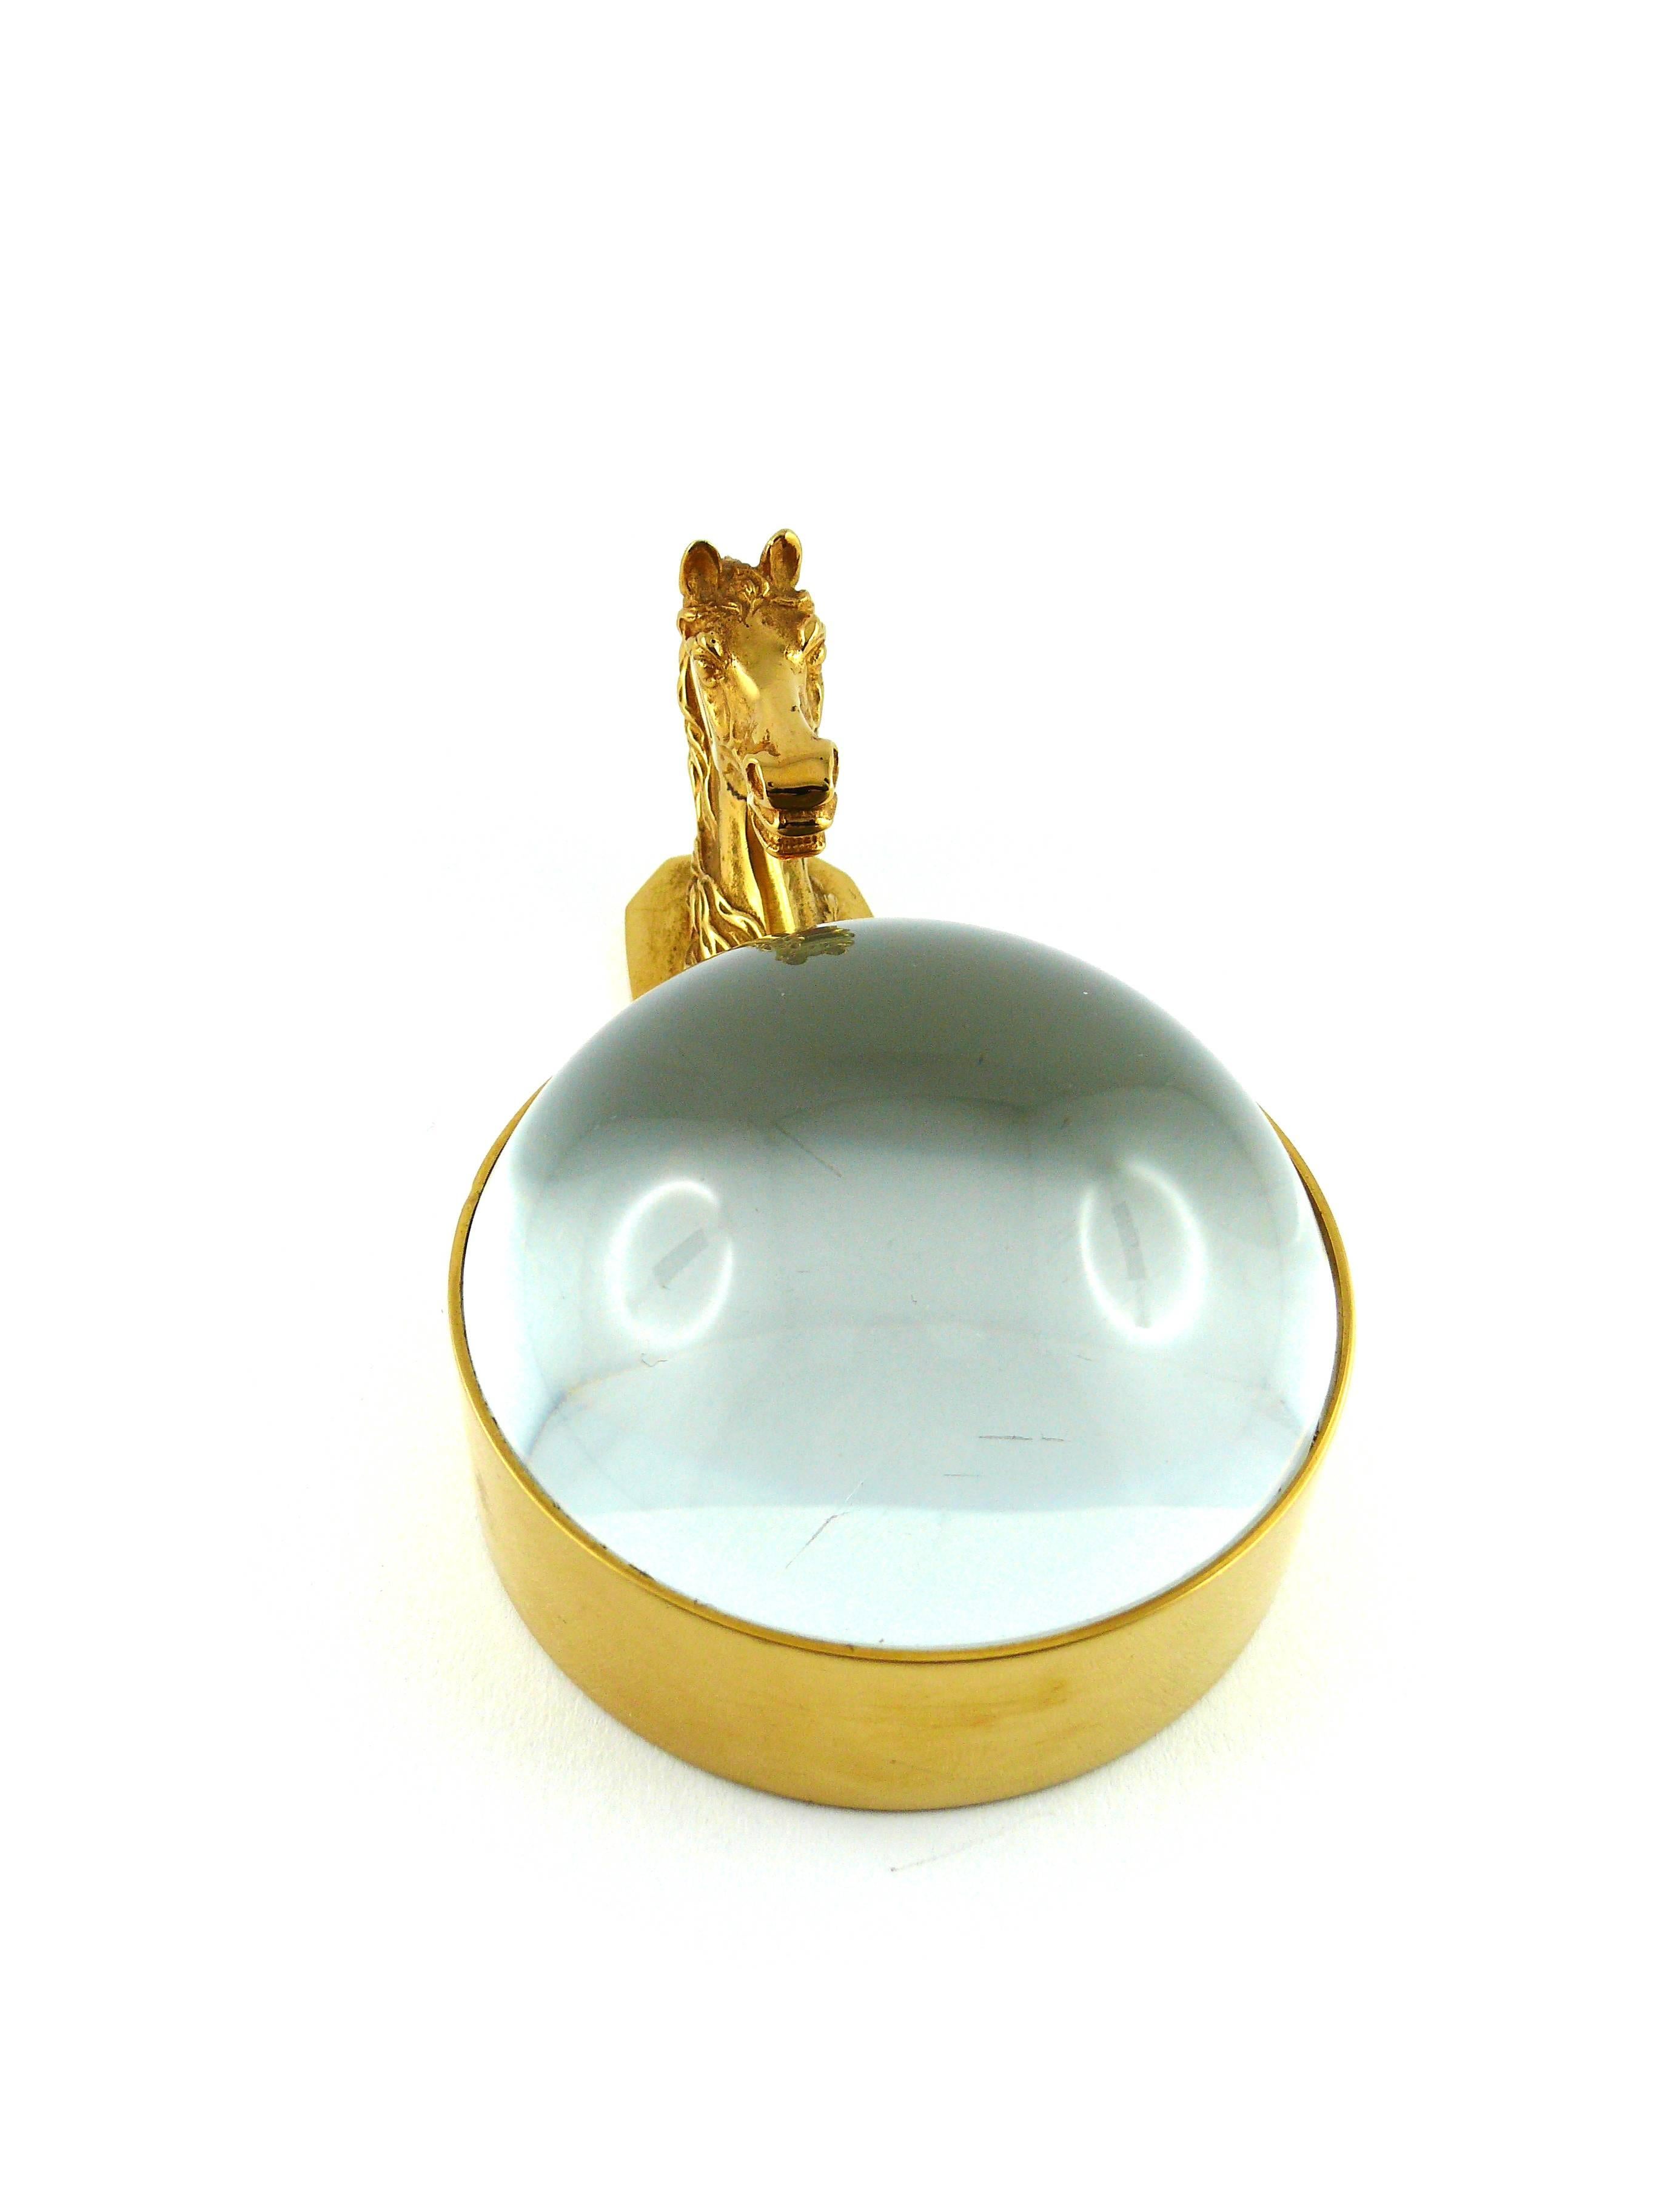 HERMES Paris rare vintage gold plated equestrian desk paperweight magnifier.

From the iconic HERMES 